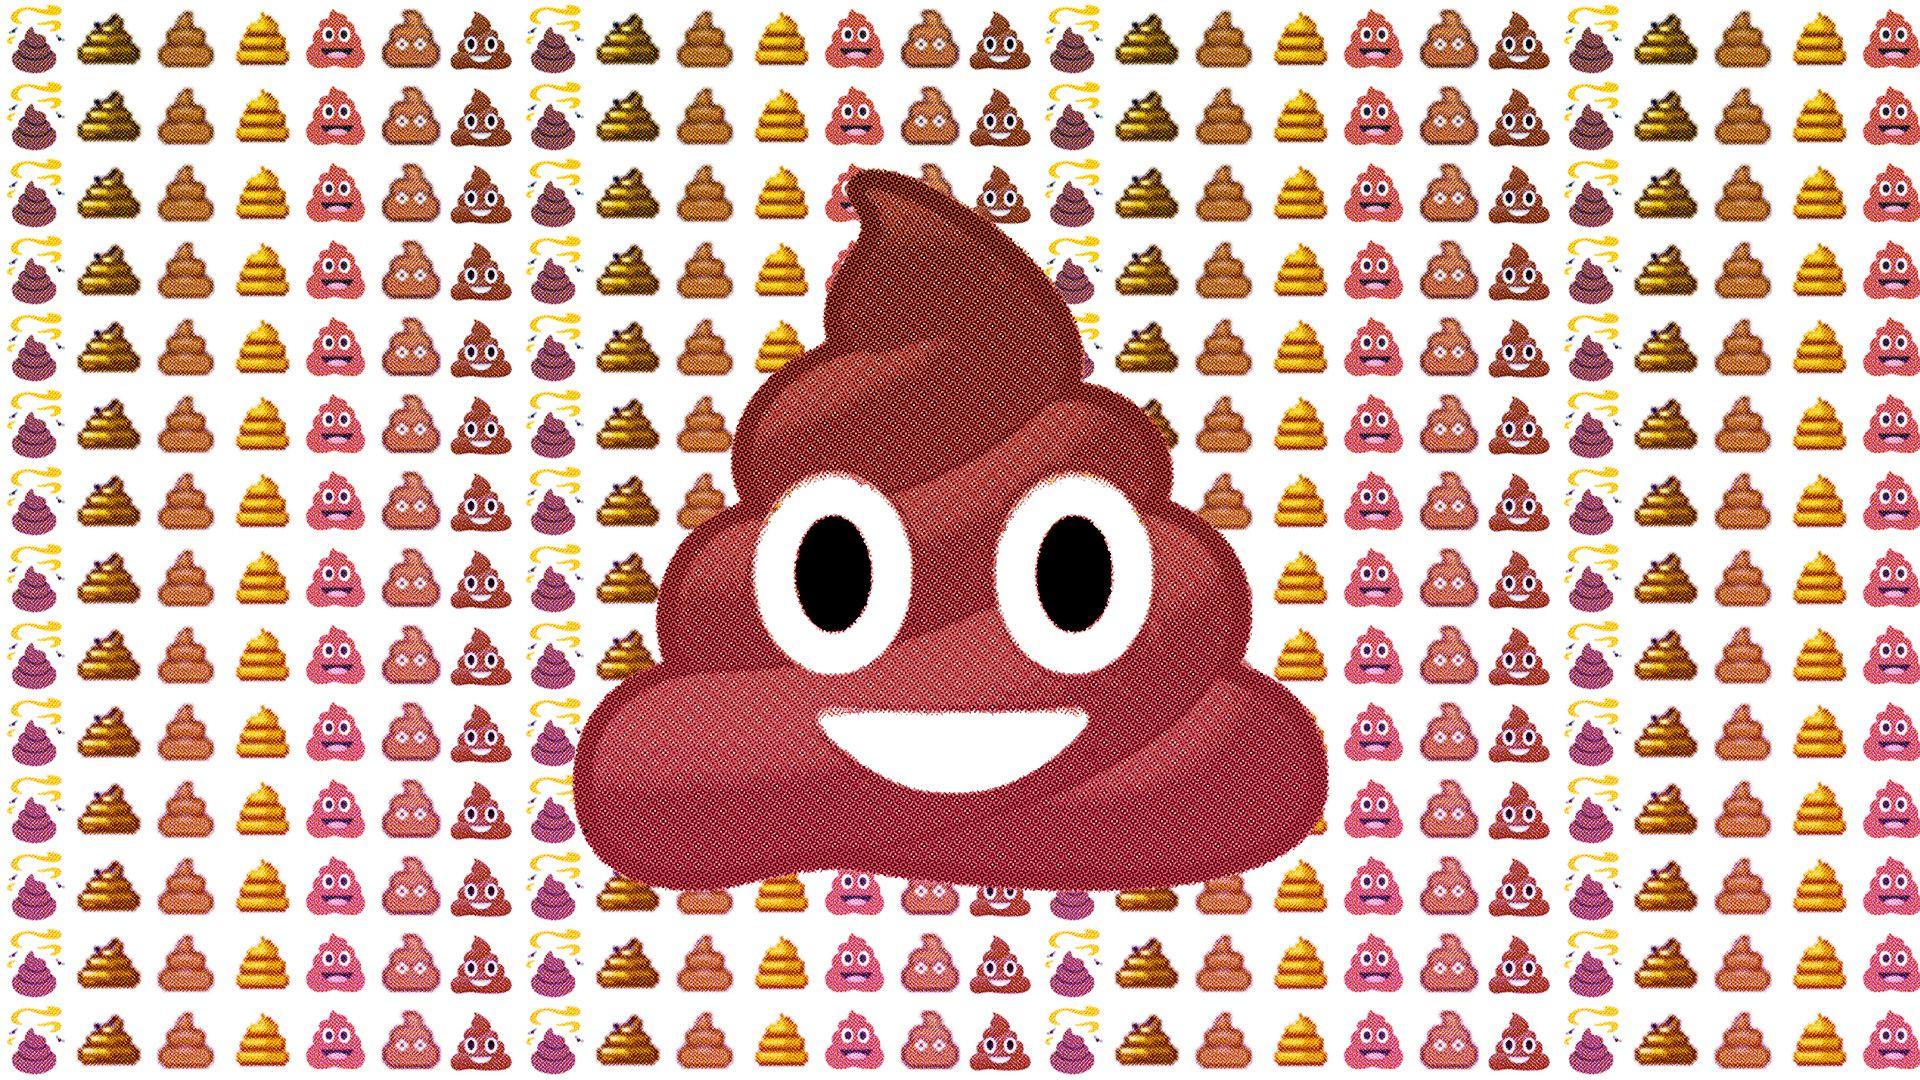 Totally poop wallpapers  Album on Imgur  ClipArt Best  ClipArt Best